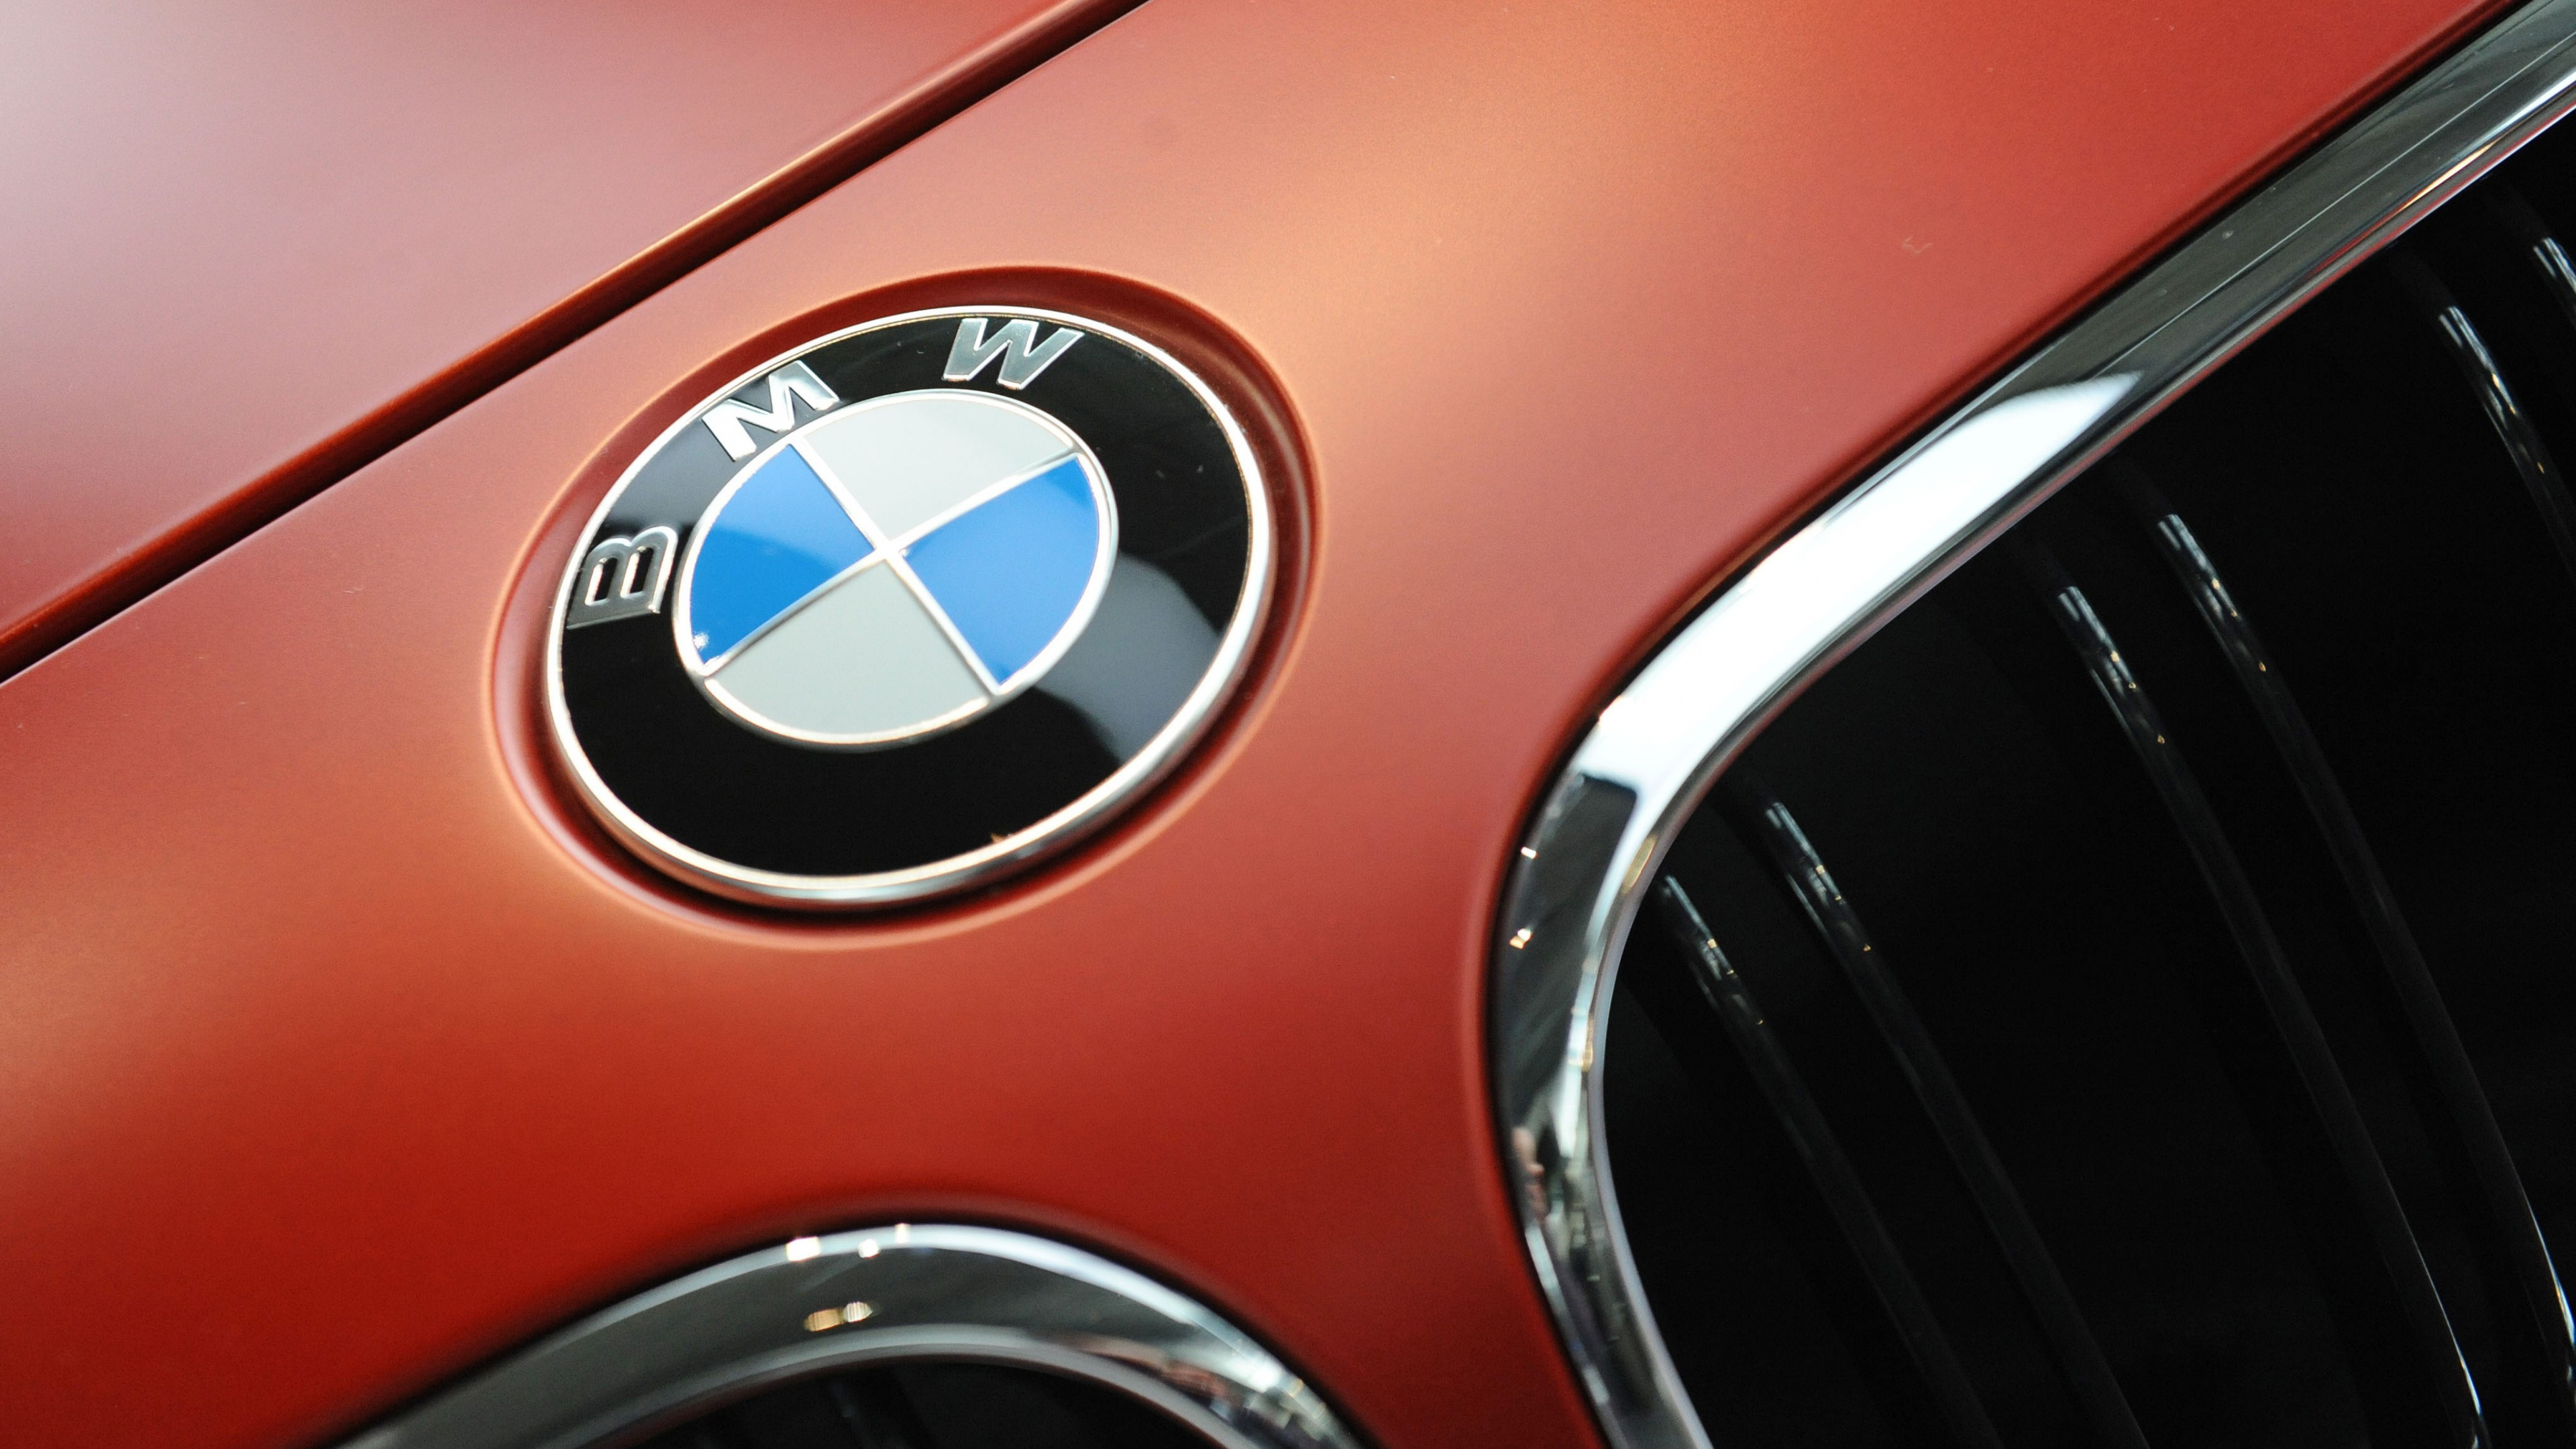 Red and Silver Bmw Car. Wallpaper in 3840x2160 Resolution